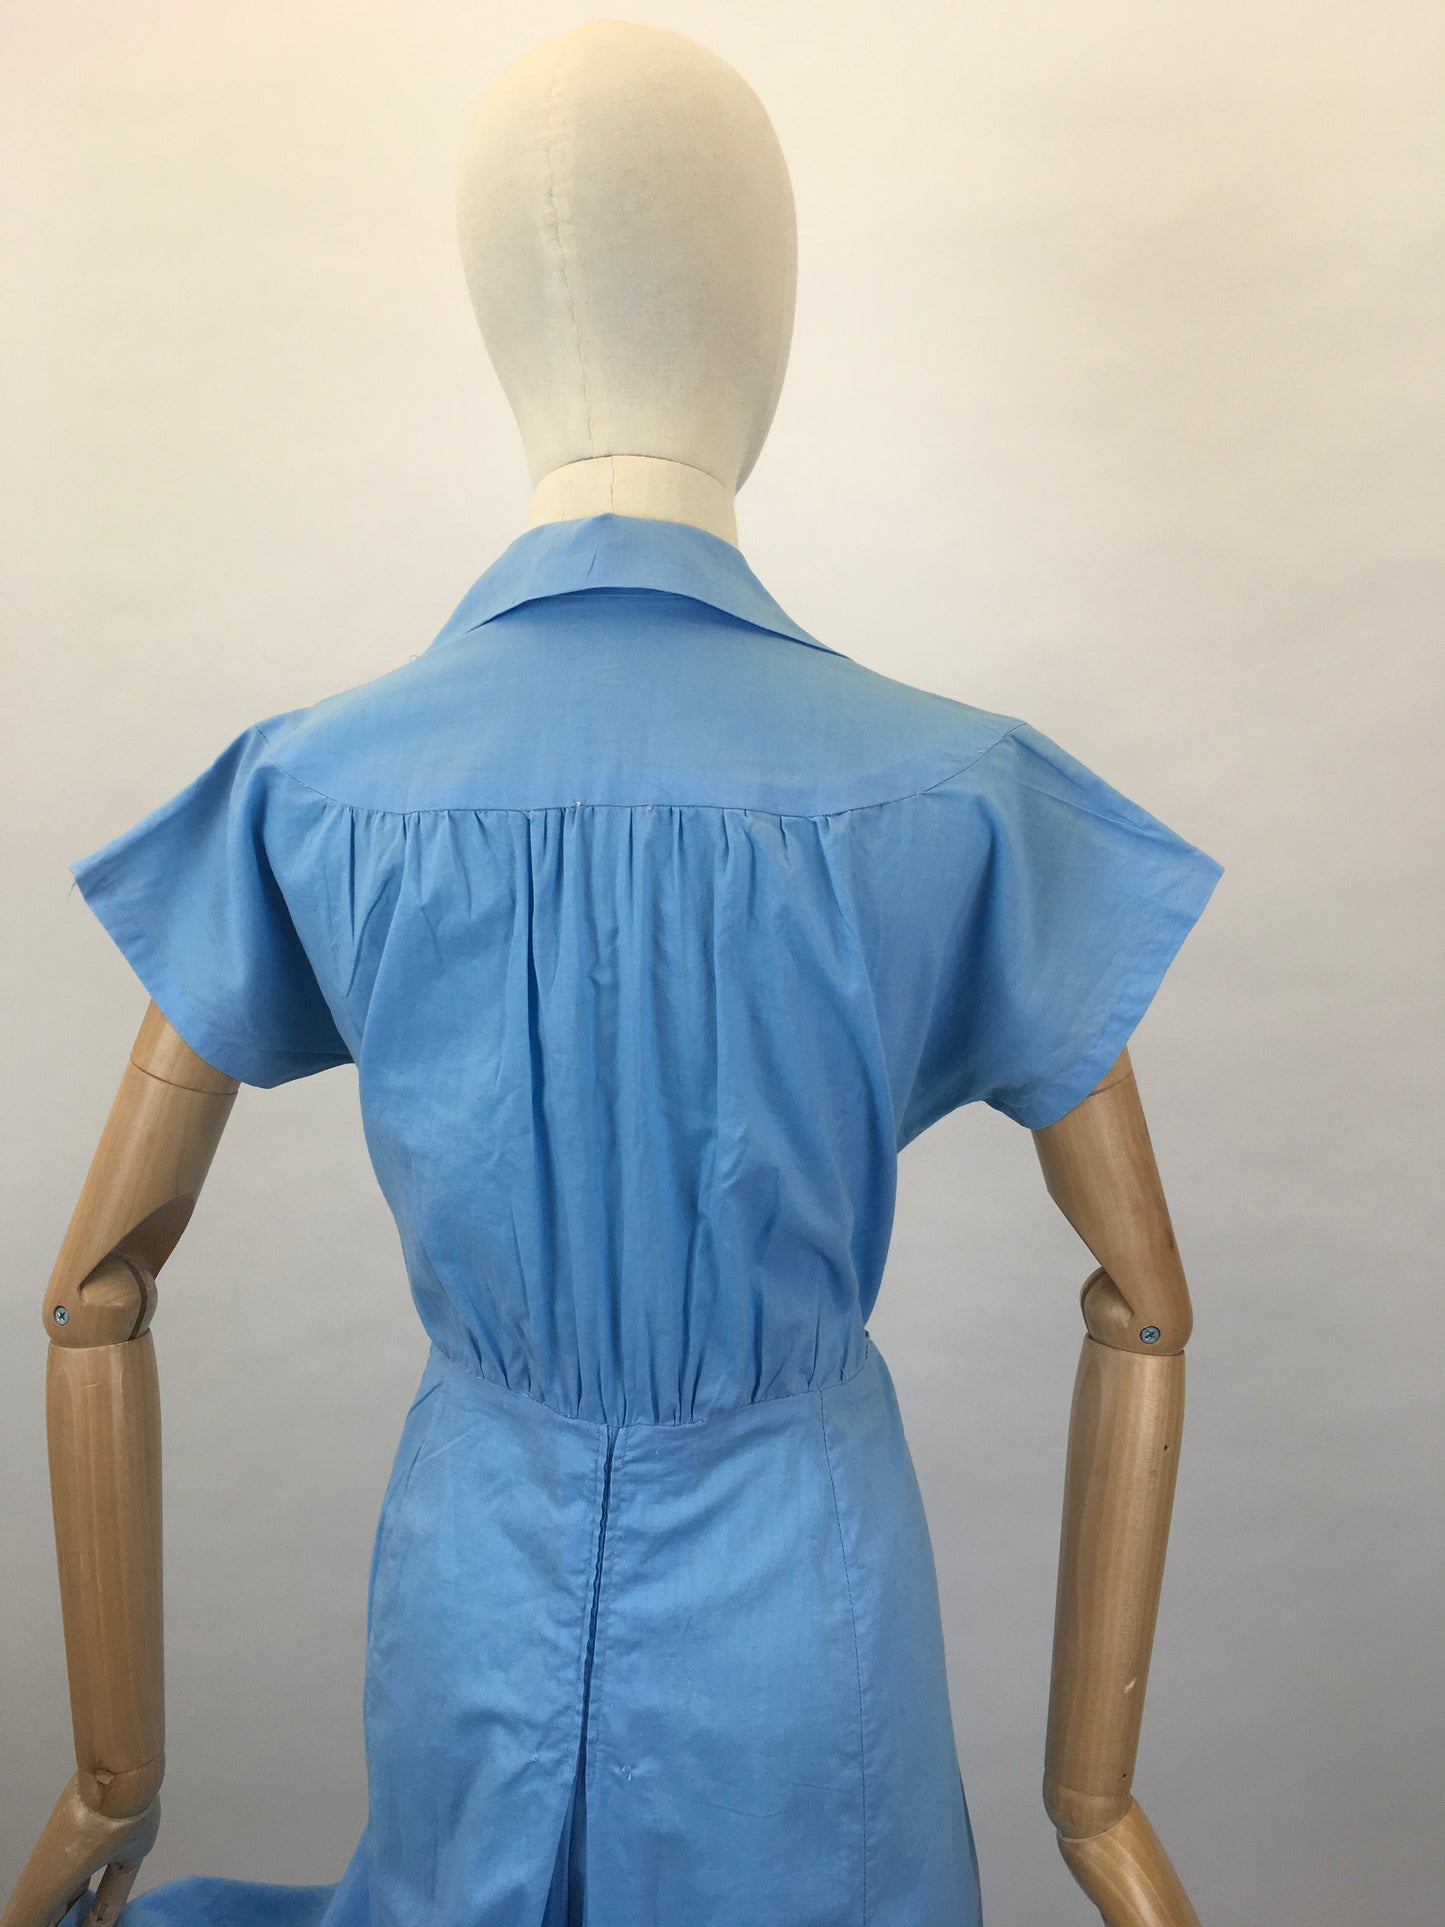 Original 1940’s Homemade Zip Front Playsuit - In a Lovely Sky Blue Cotton